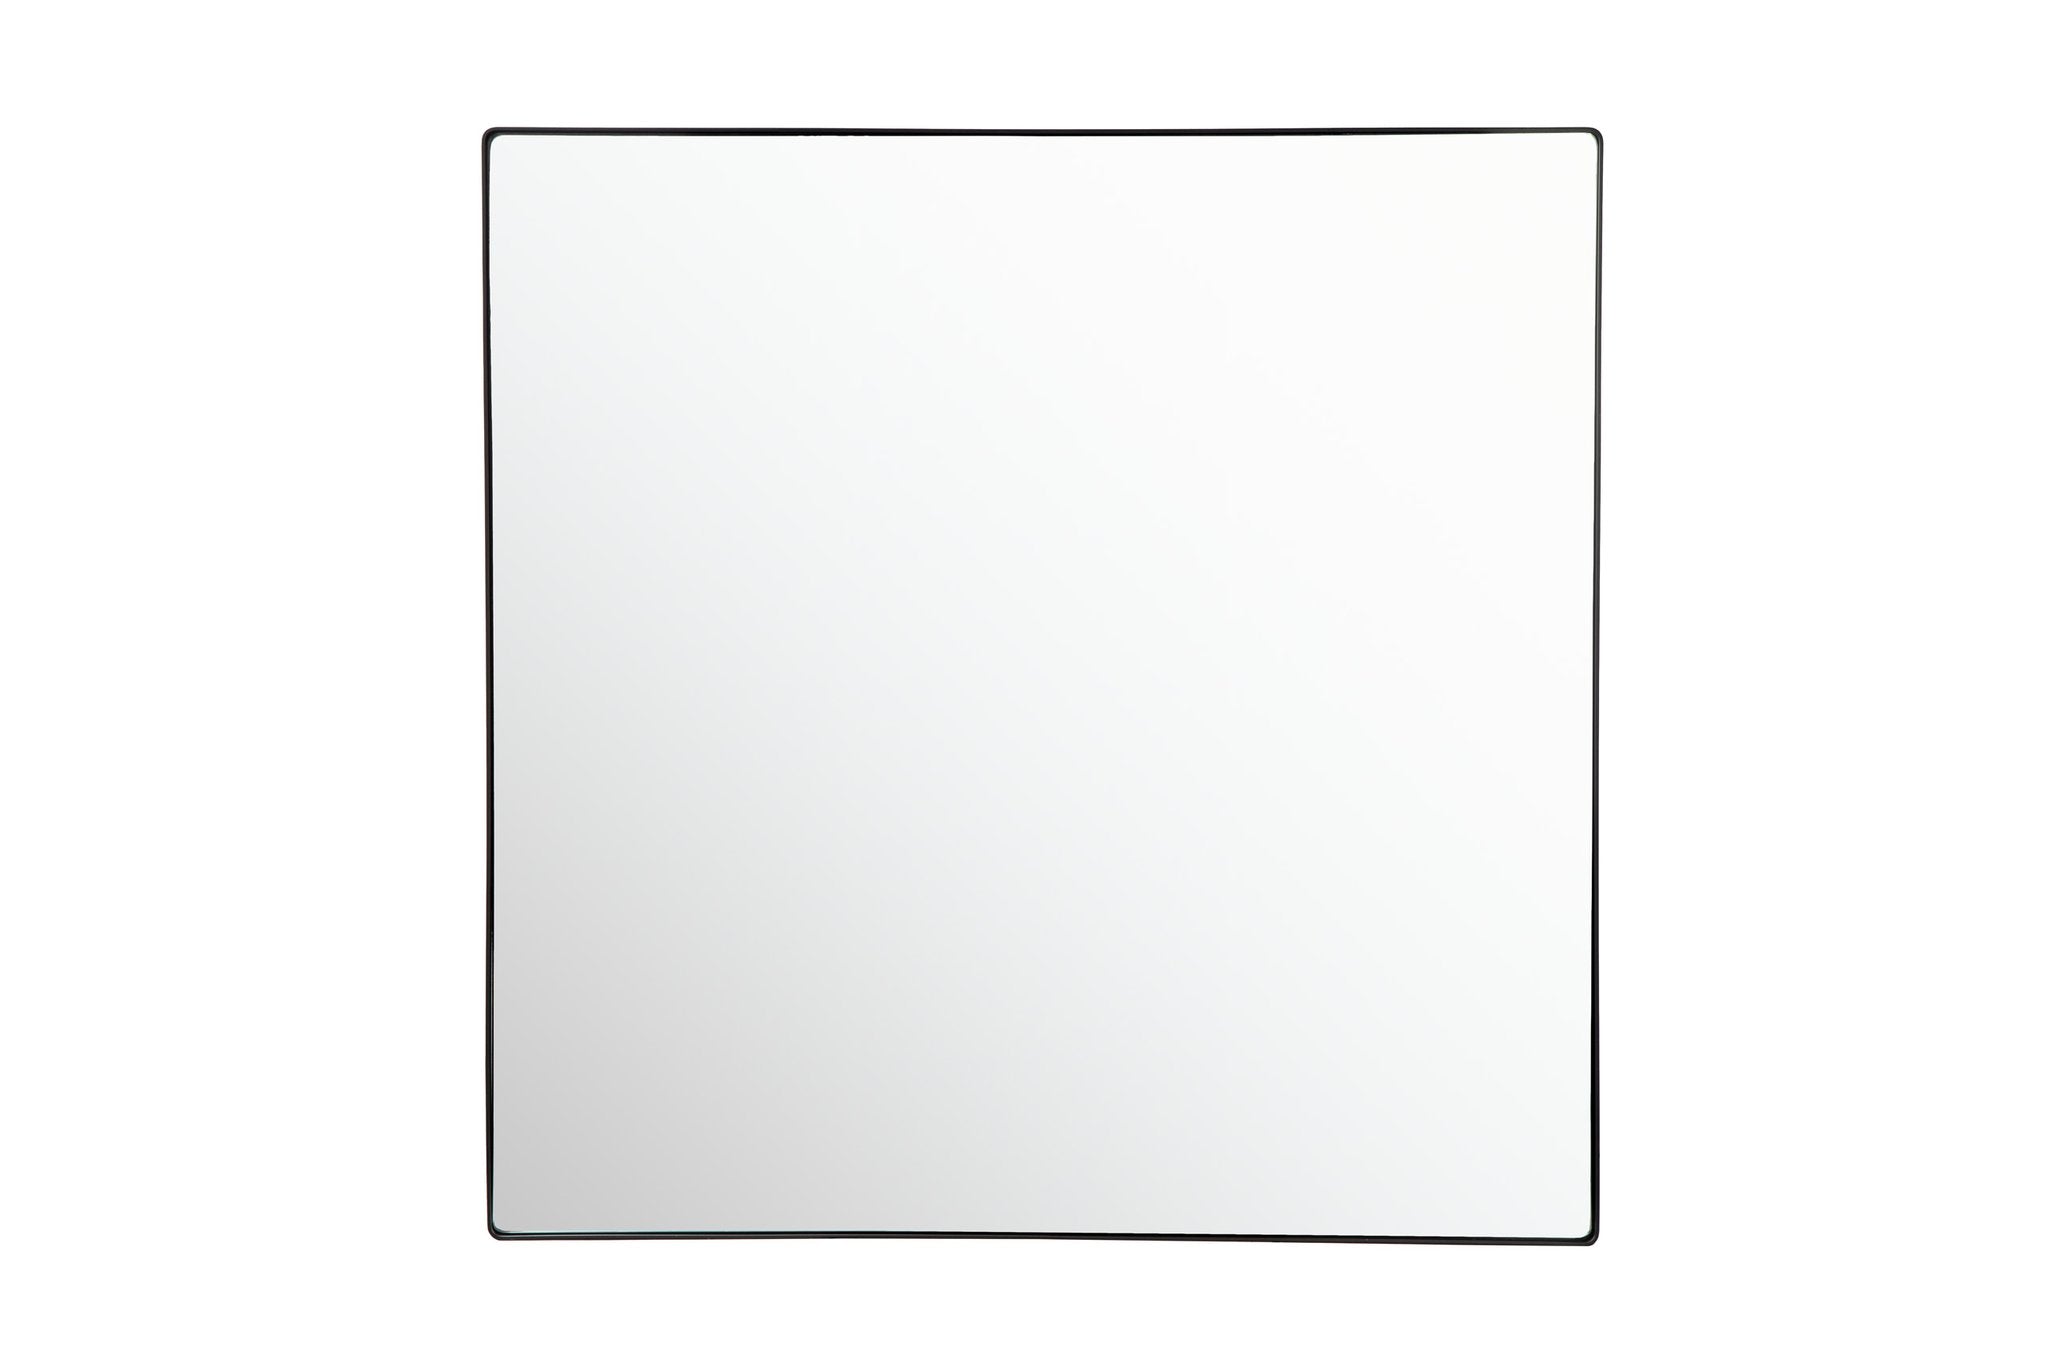 Varaluz Kye Rounded Square Mirror - 40x40